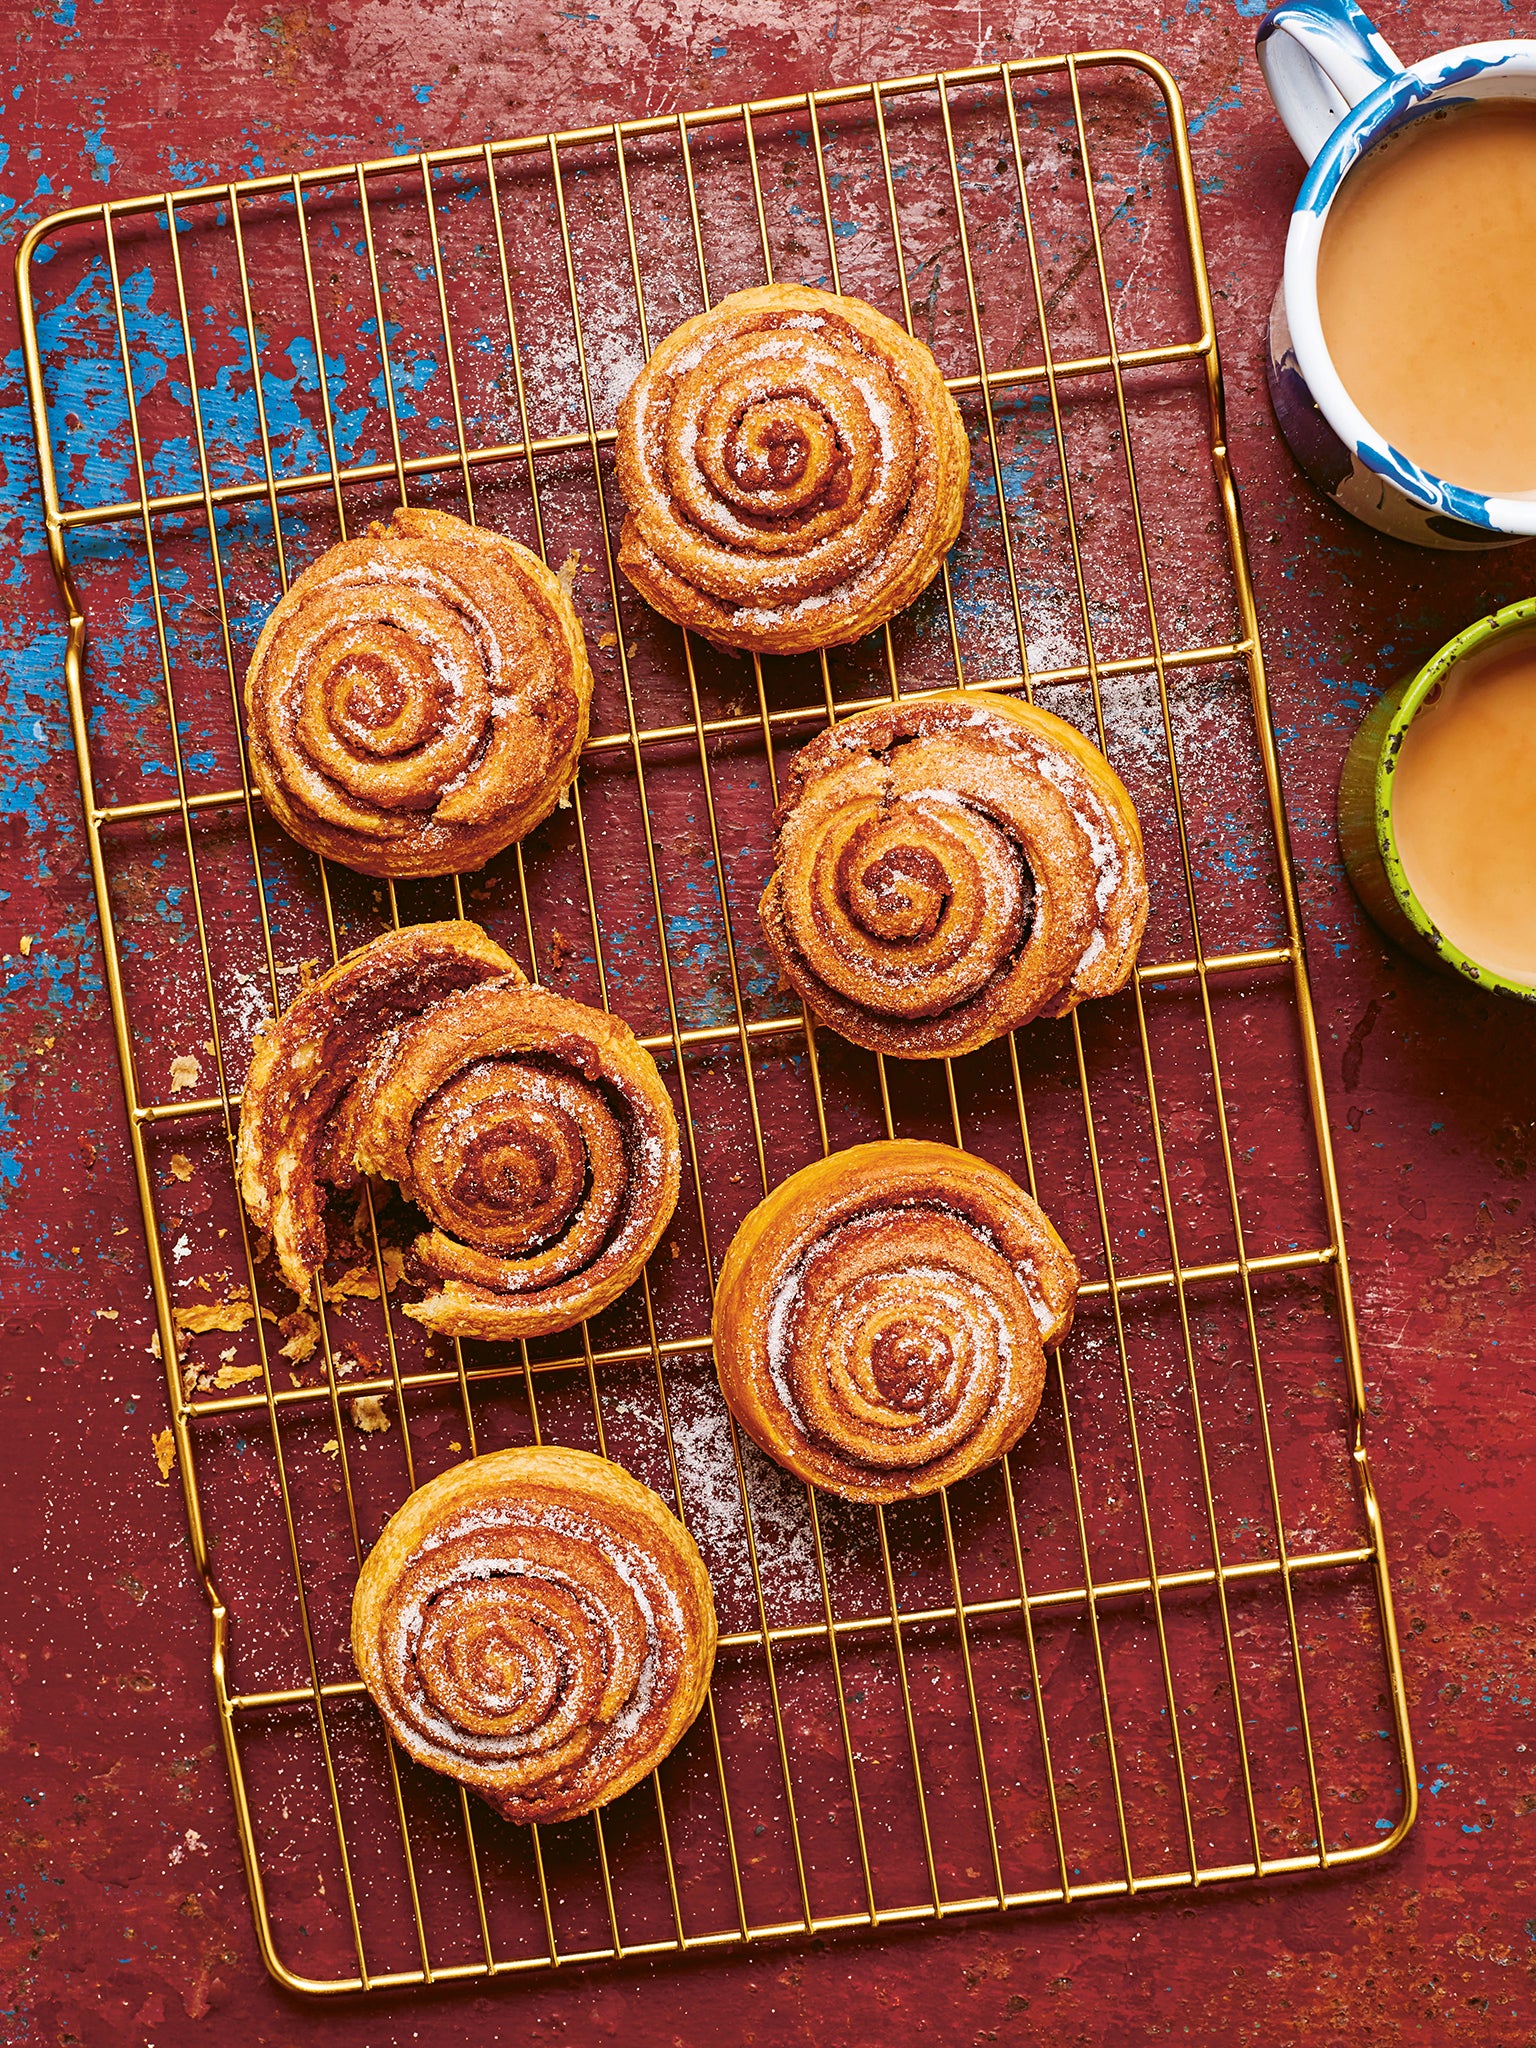 These pillowy treats are spiced to perfection